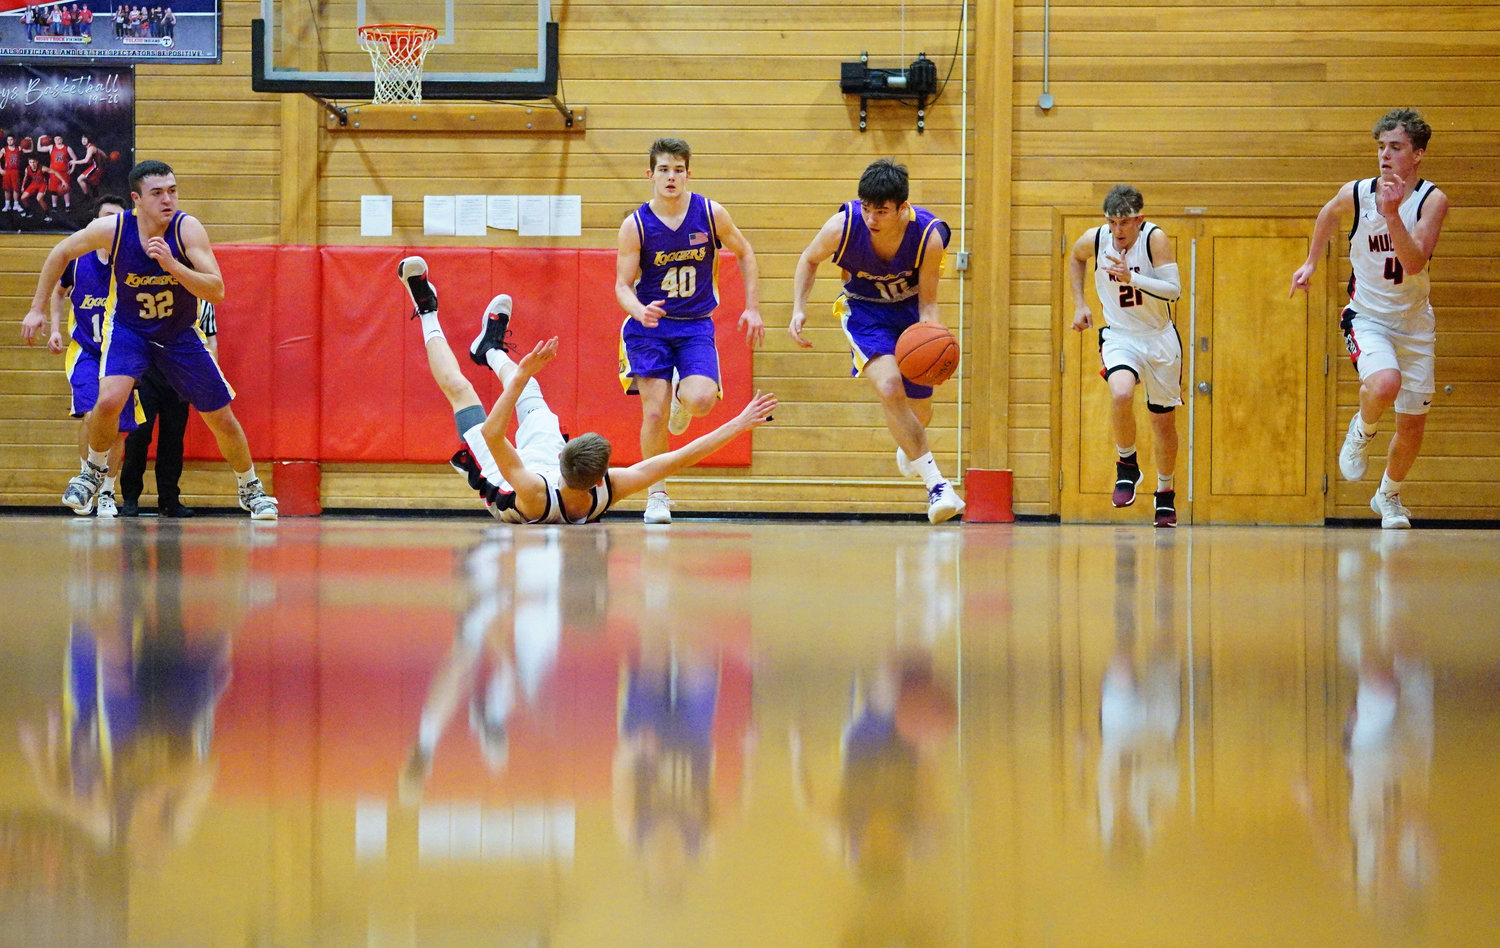 Onalaska's Danny Dalsted steals the ball and heads upcourt against Wahkiakum in Cathlamet on Monday.